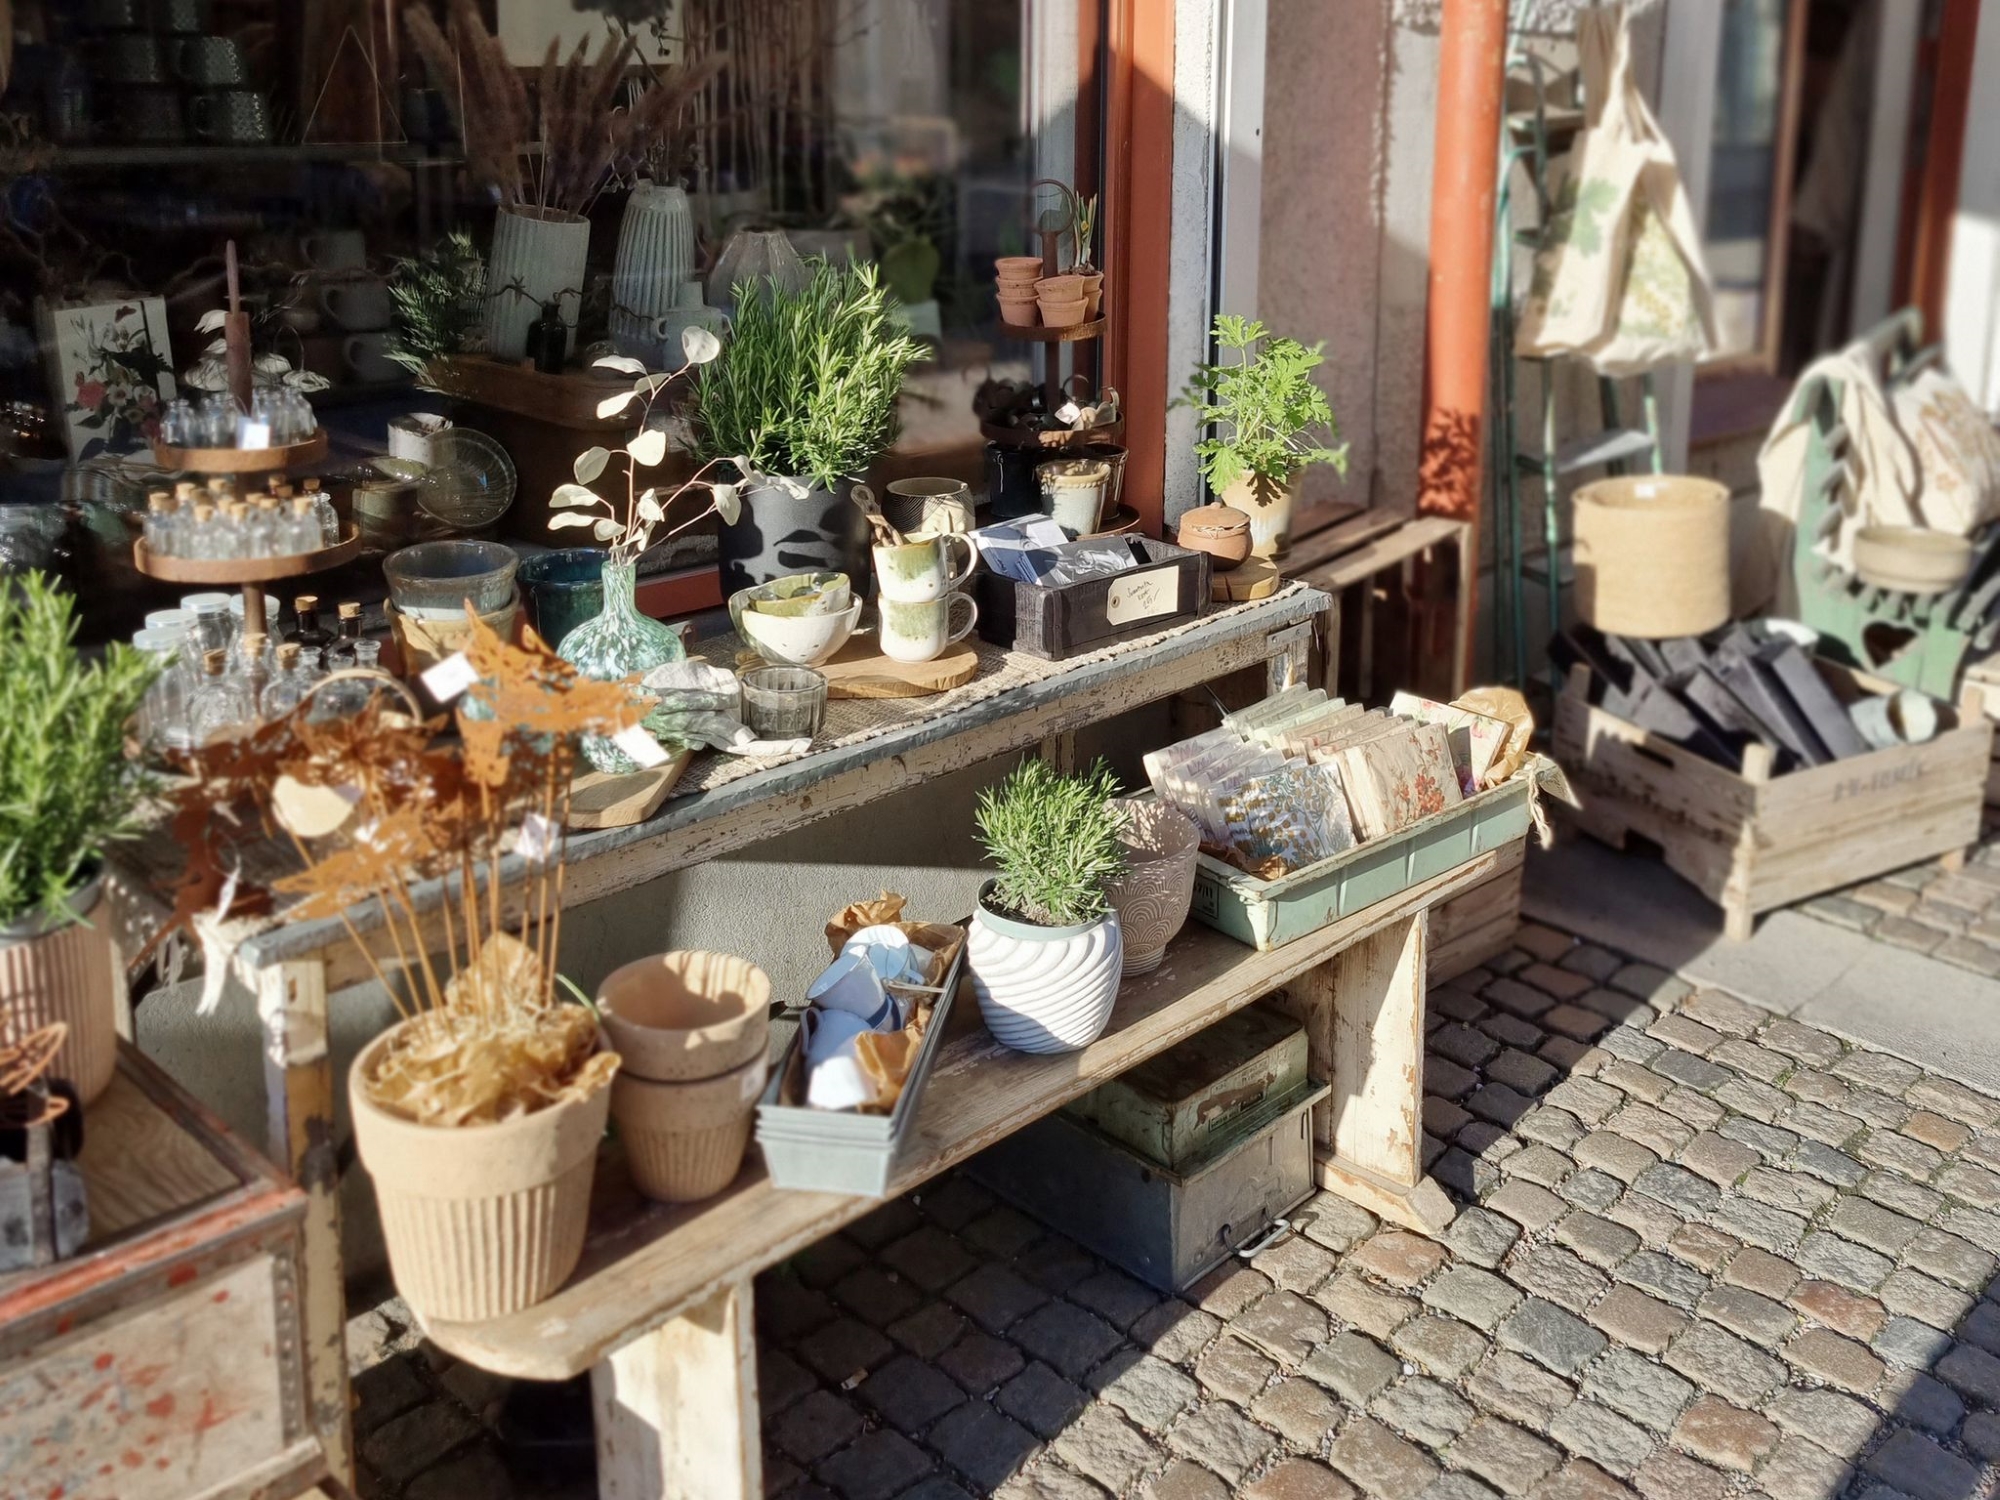 A store outside with different vases and plants, as well as small pieces of decoration such as cups, small glass jars and napkins.